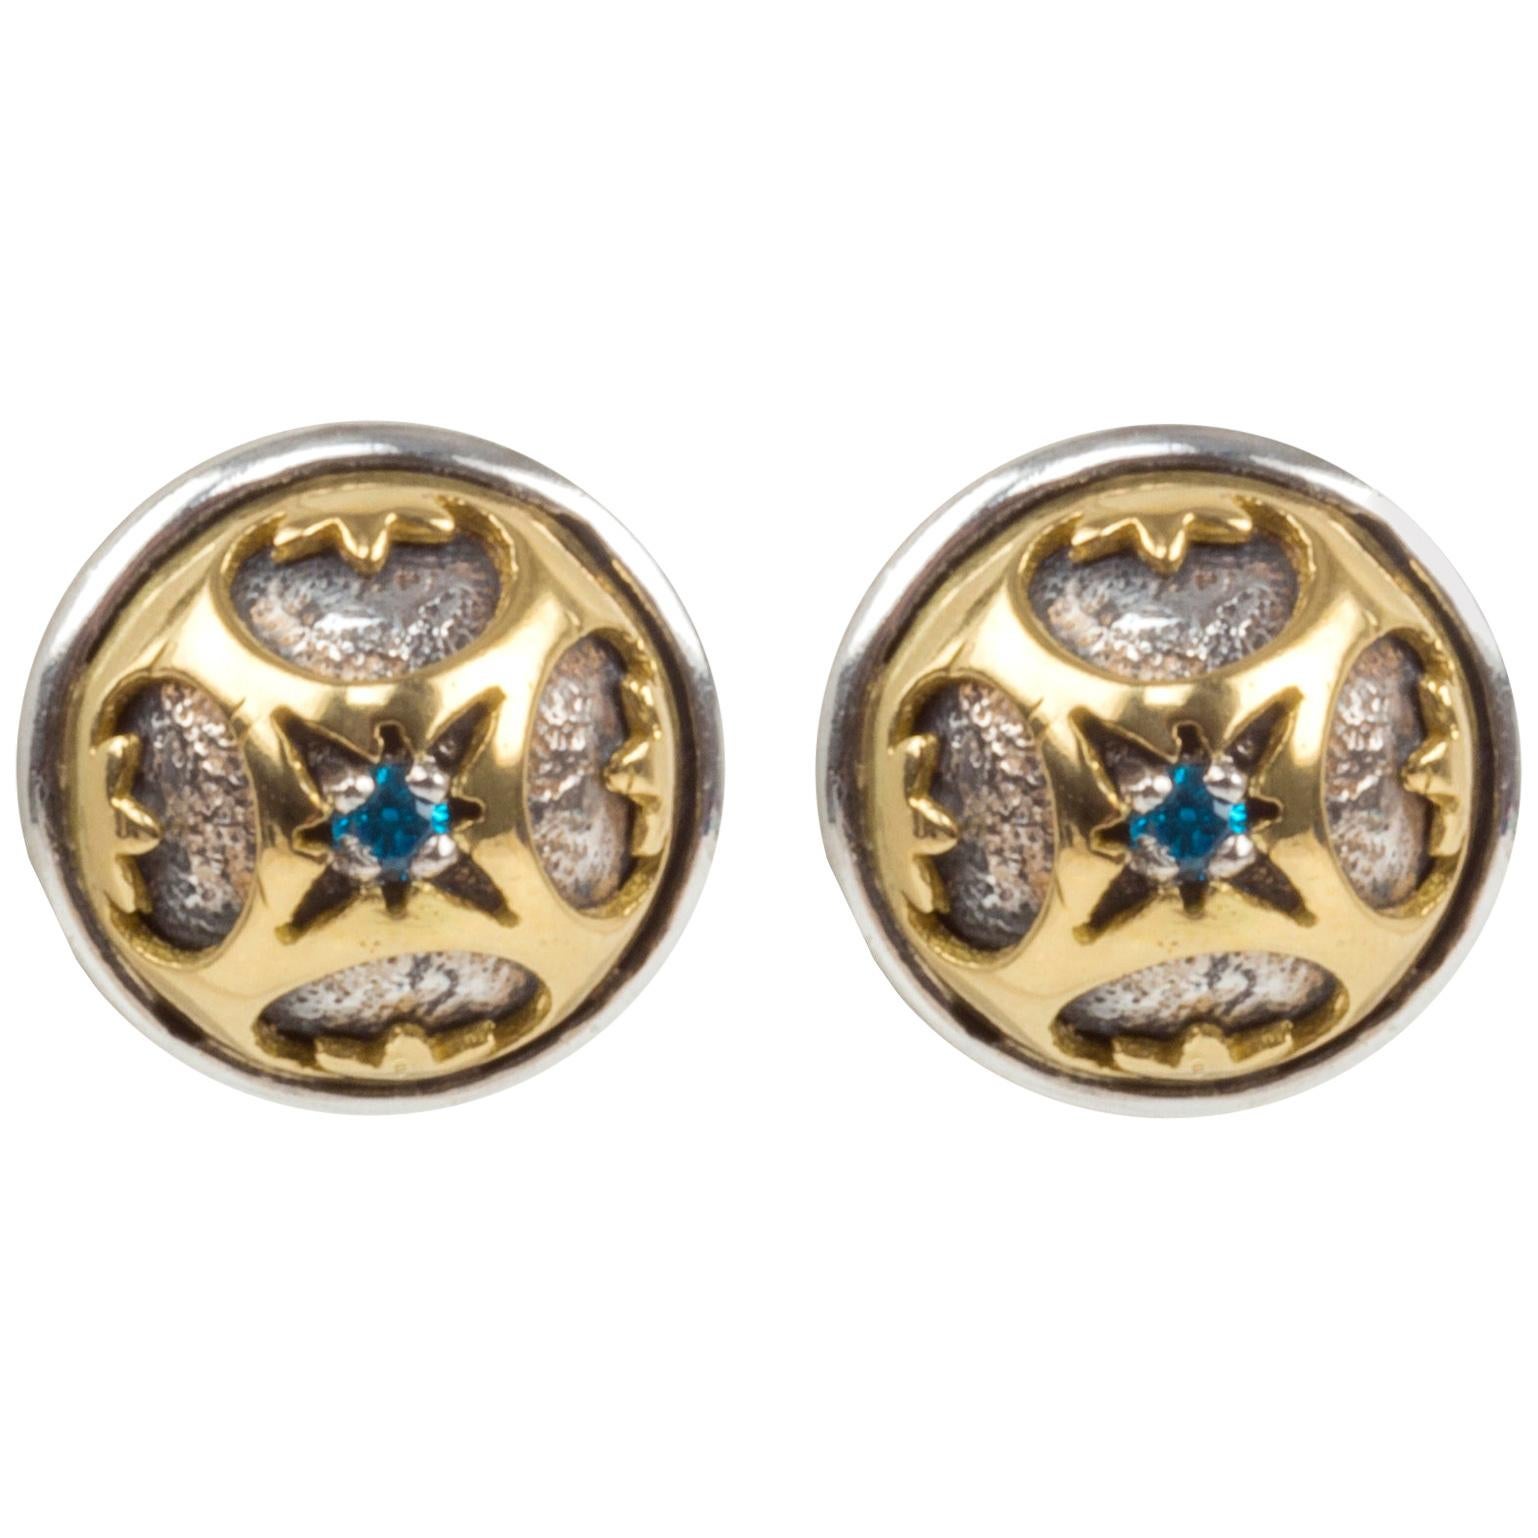 Konstantino Button Gold and Sterling Silver Pierced Earrings with Blue Spinel